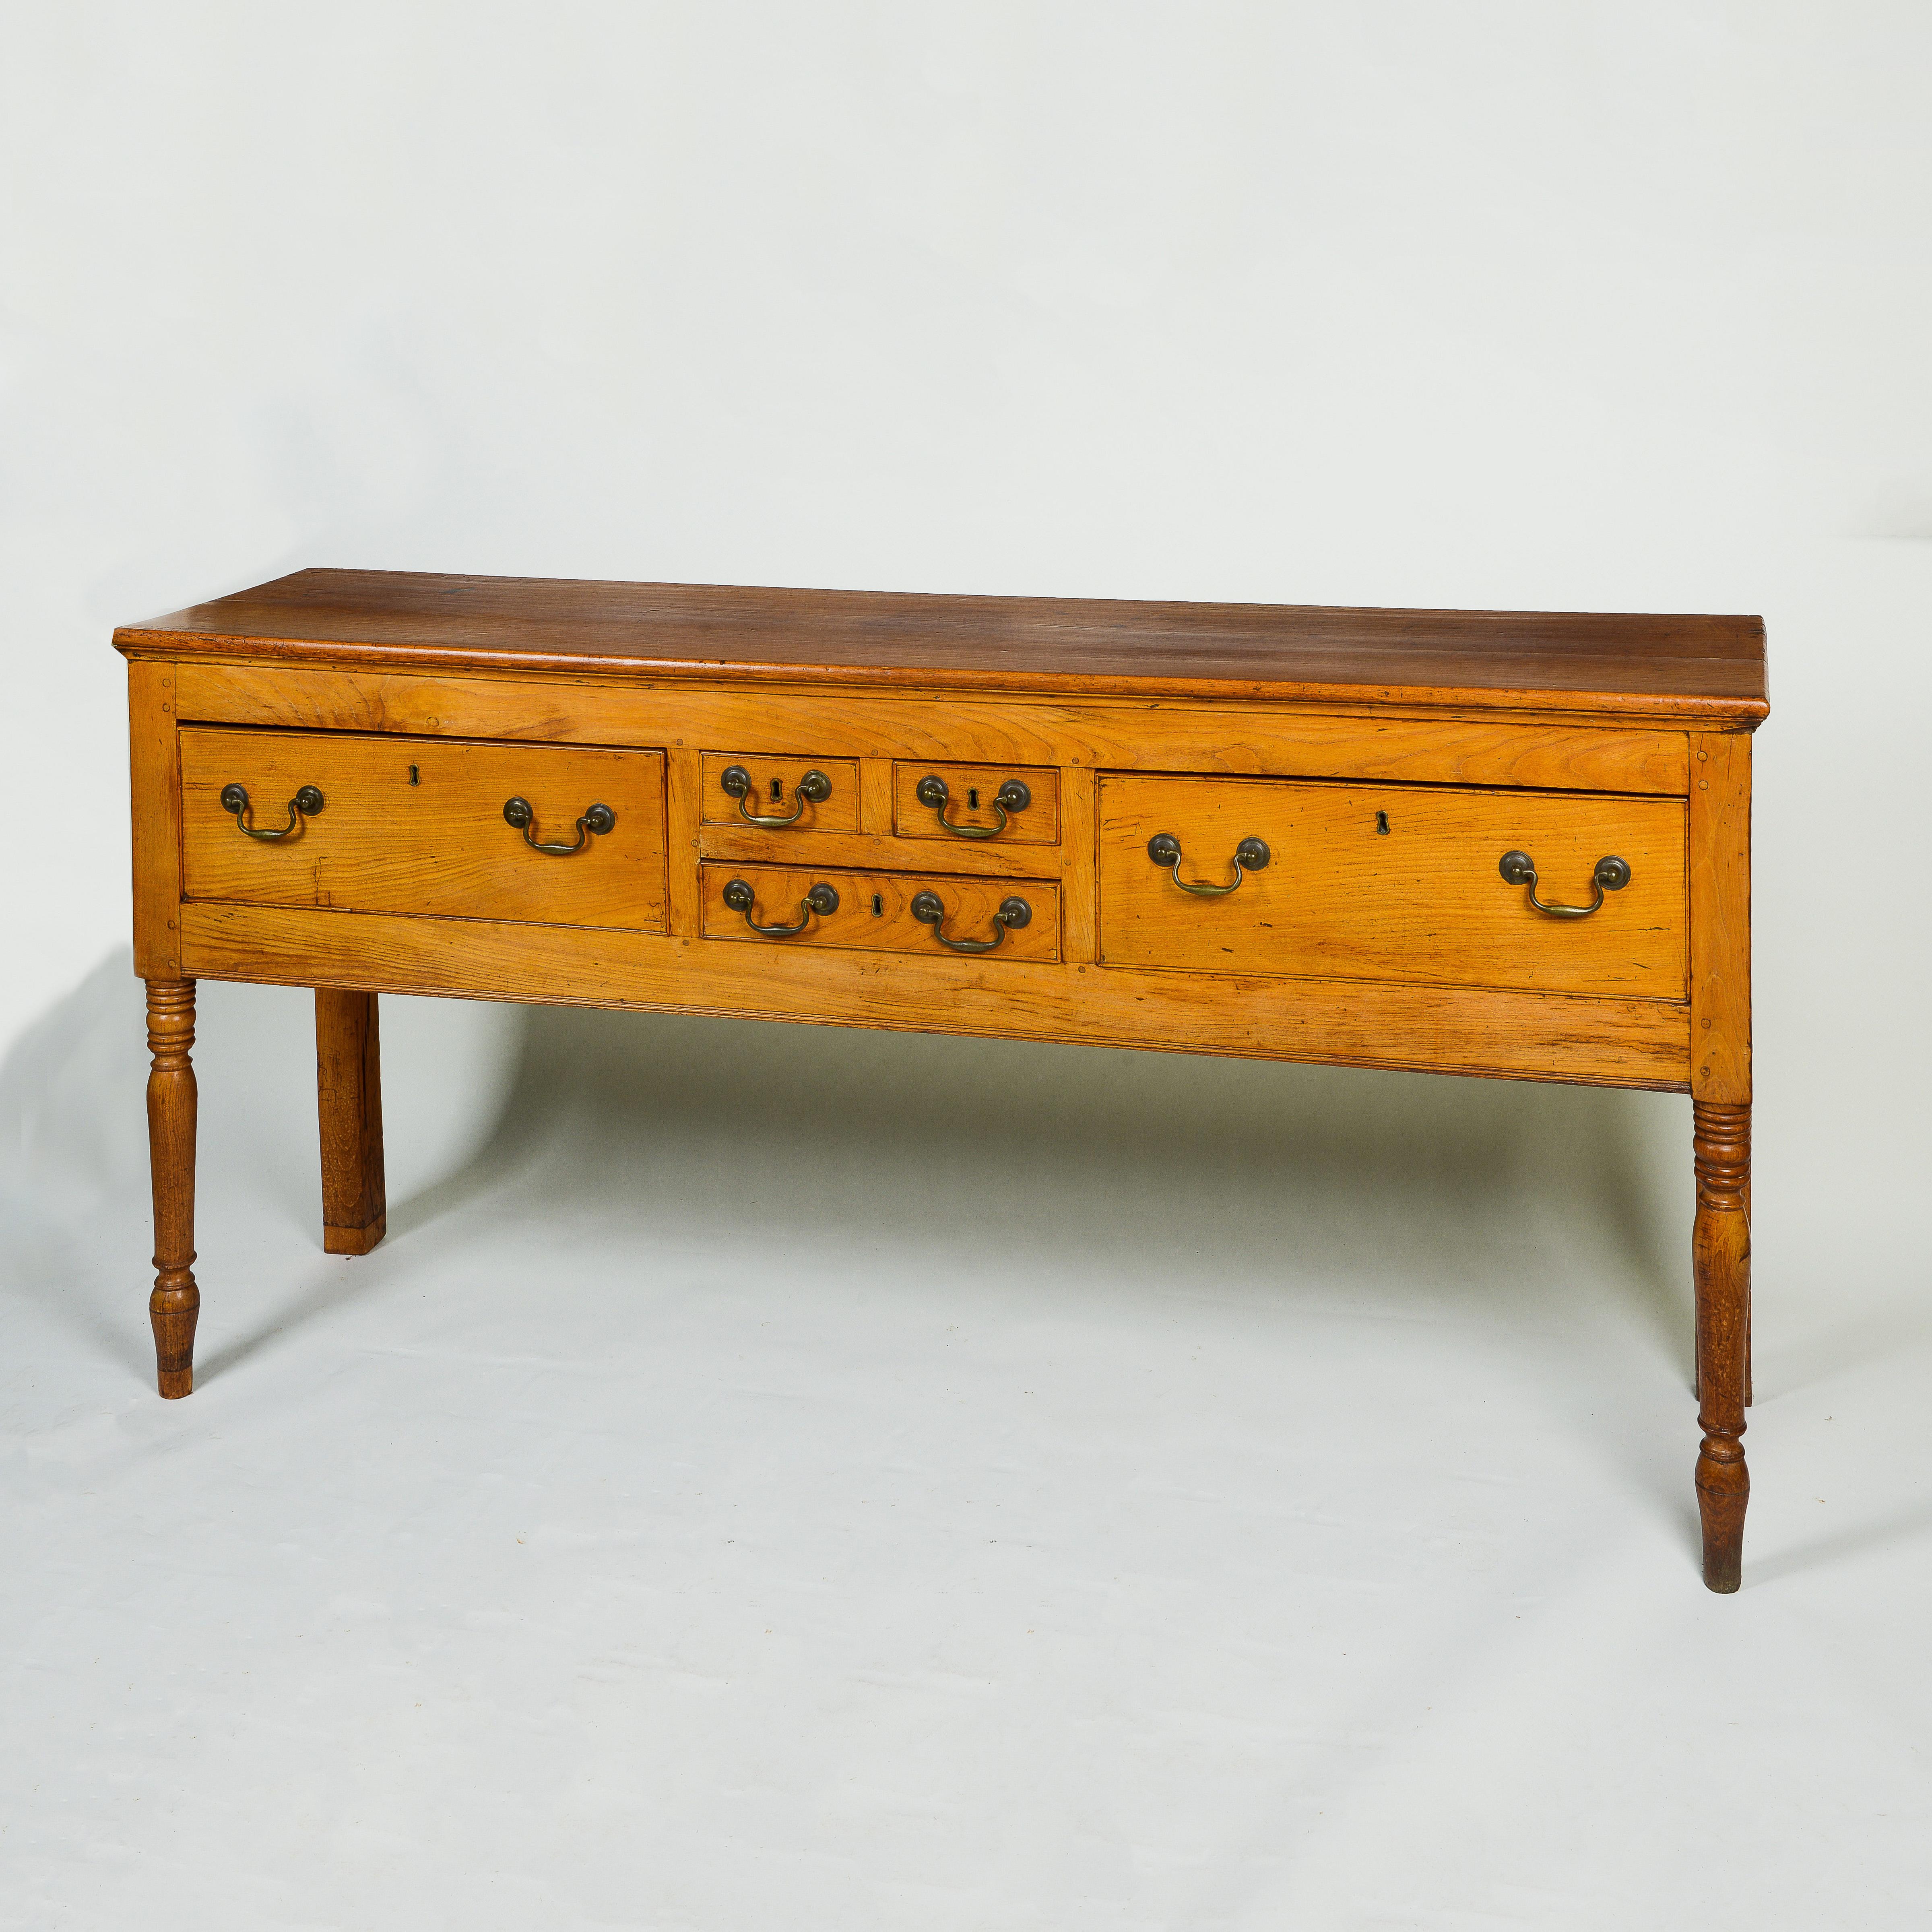 The rectangular overhanging top over a deep frieze fitted with five drawers mounted with brass bale handles; raised on front ring turned legs.